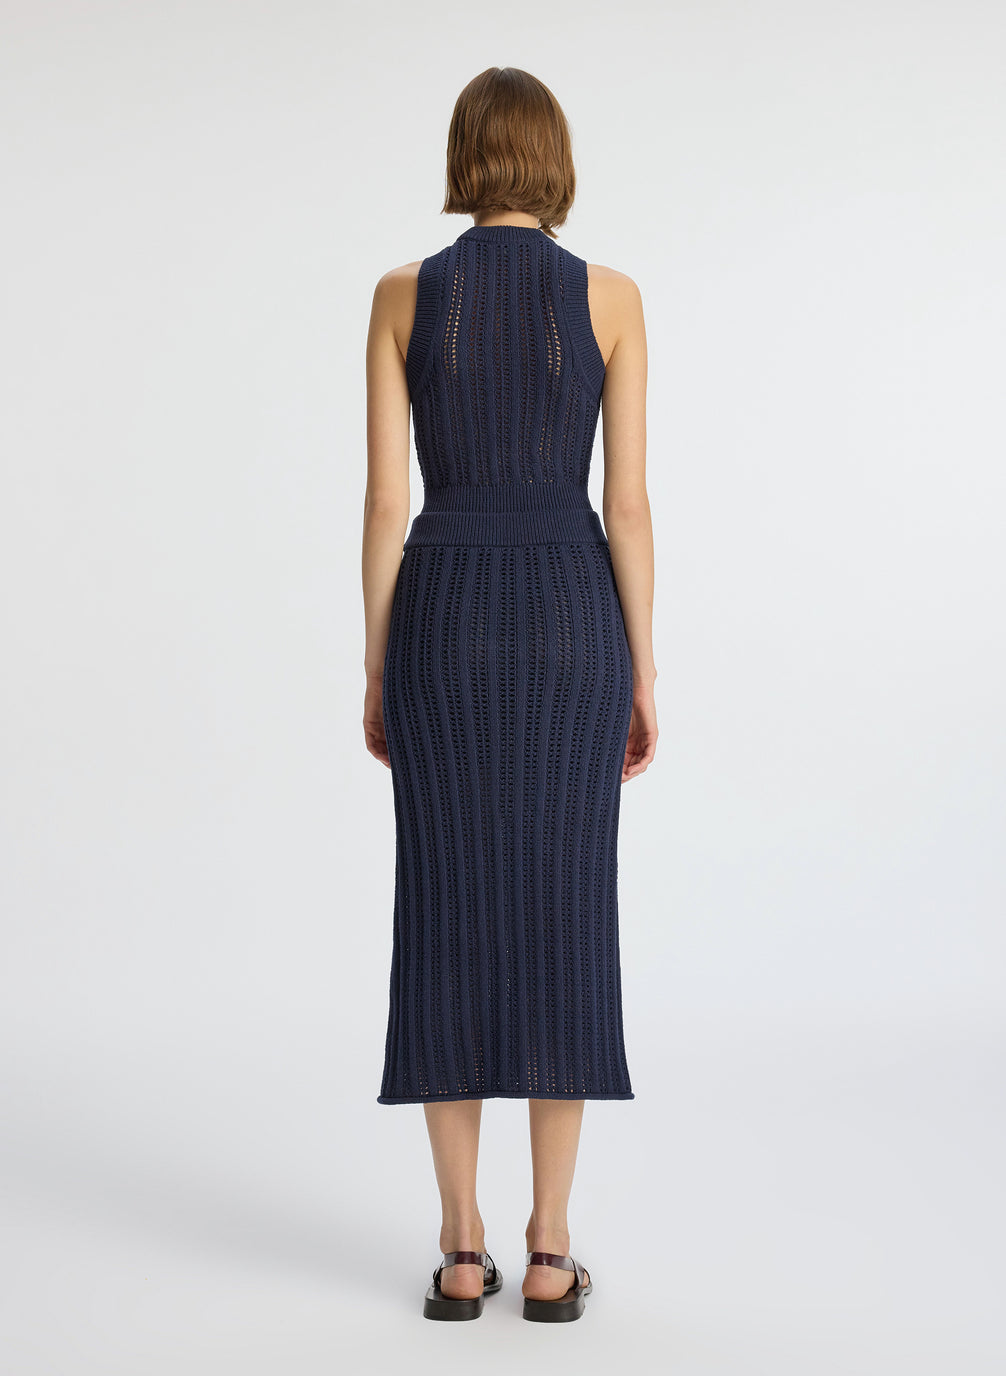 back  view of woman wearing navy blue woven tank top and matching midi skirt